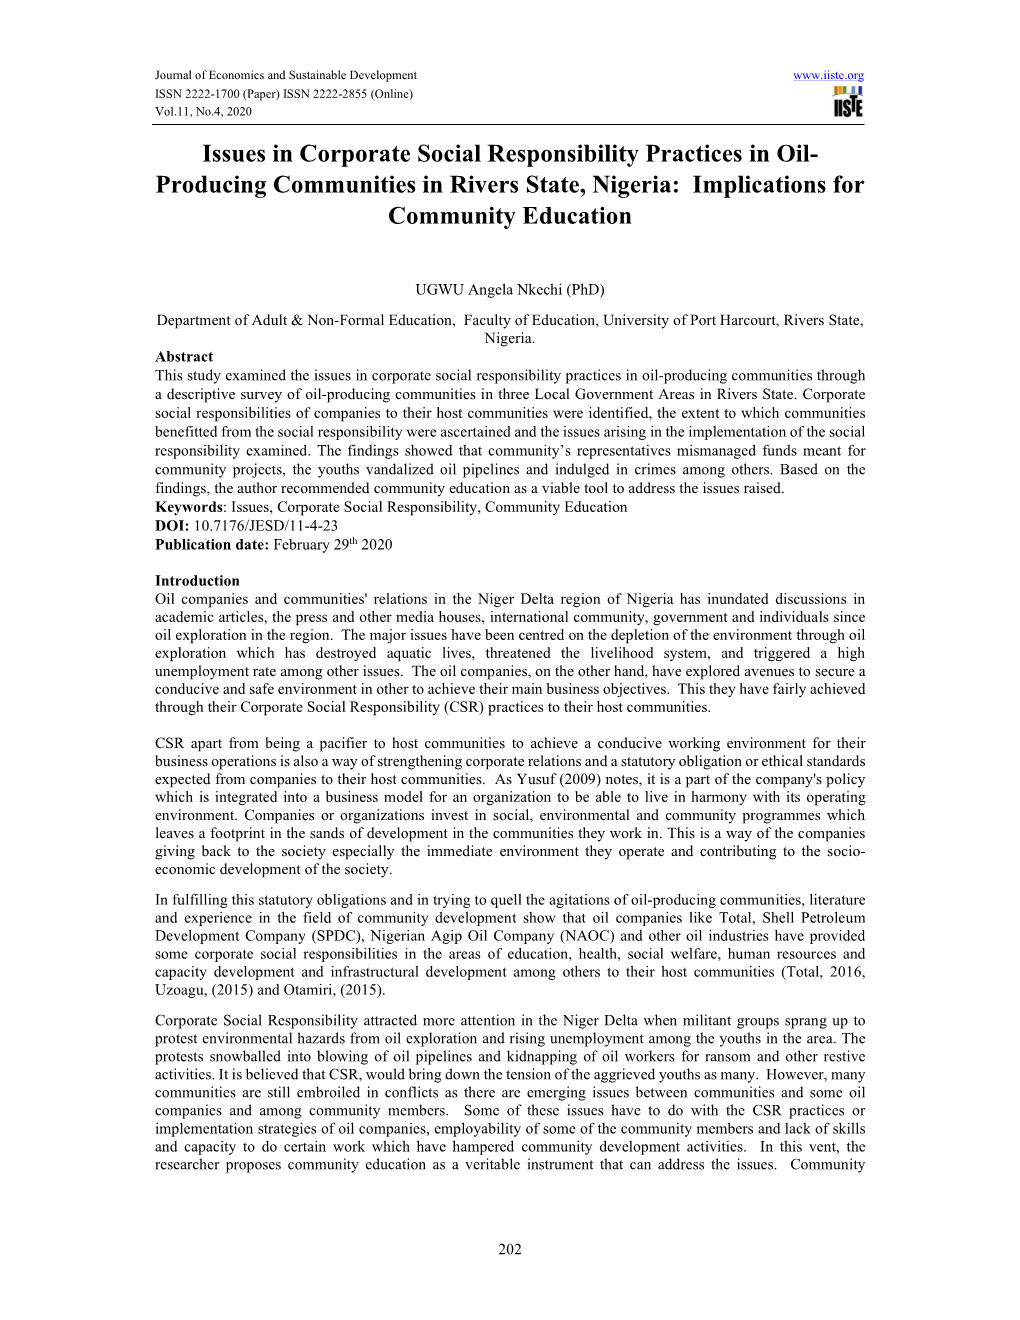 Producing Communities in Rivers State, Nigeria: Implications for Community Education